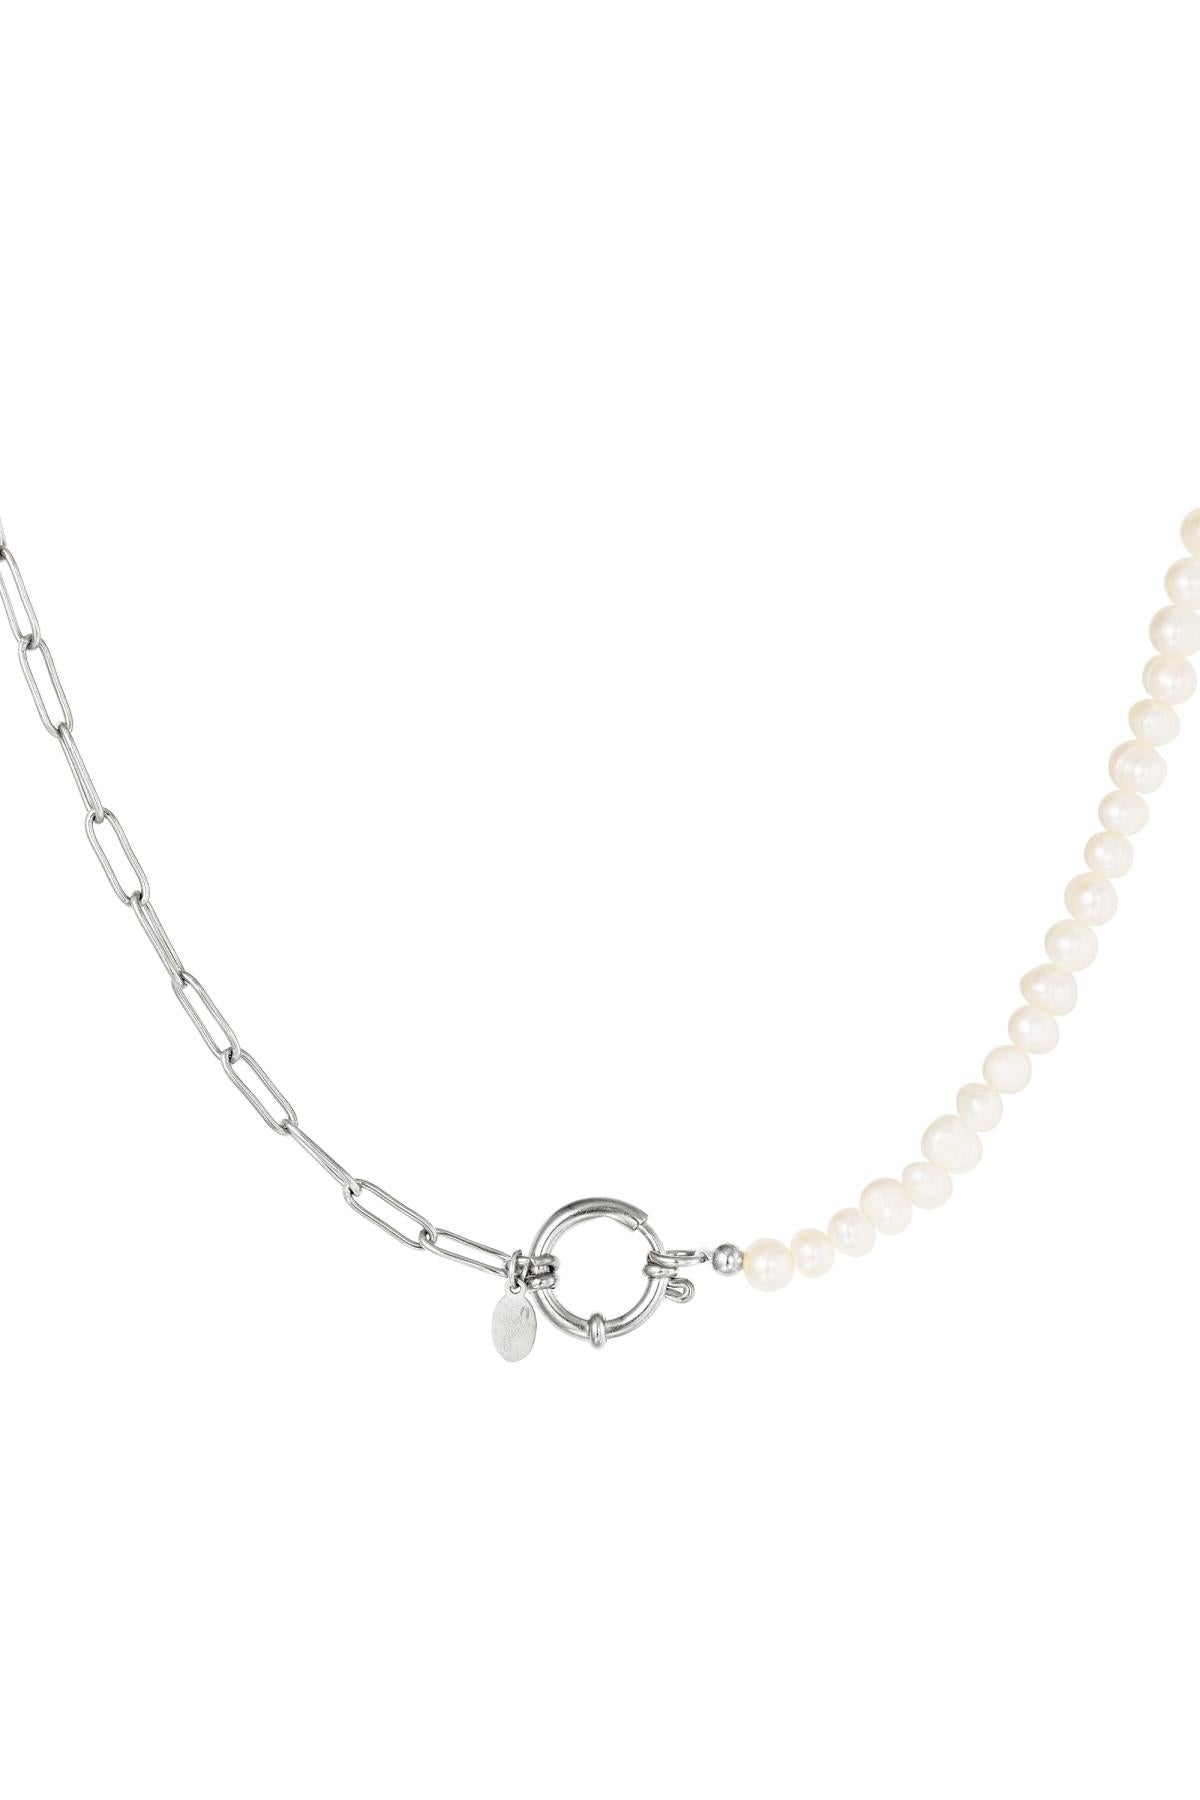 PEARL CHAIN KETTING - ZILVER/PAREL